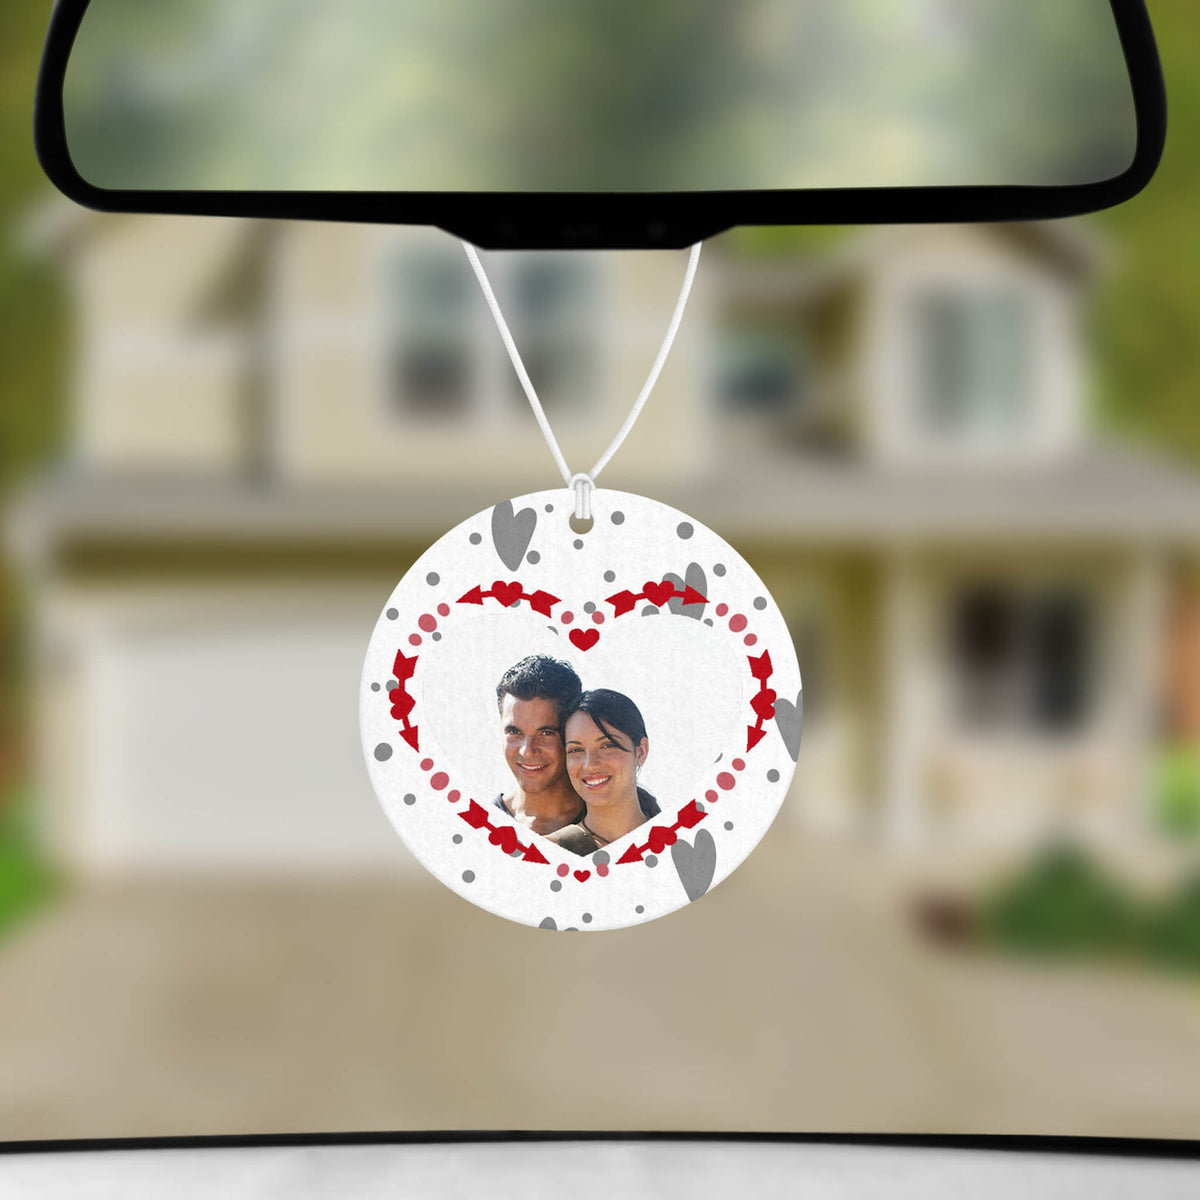 Personalized Air Fresheners | Set of 2 | Custom Car Accessories | Love Birds